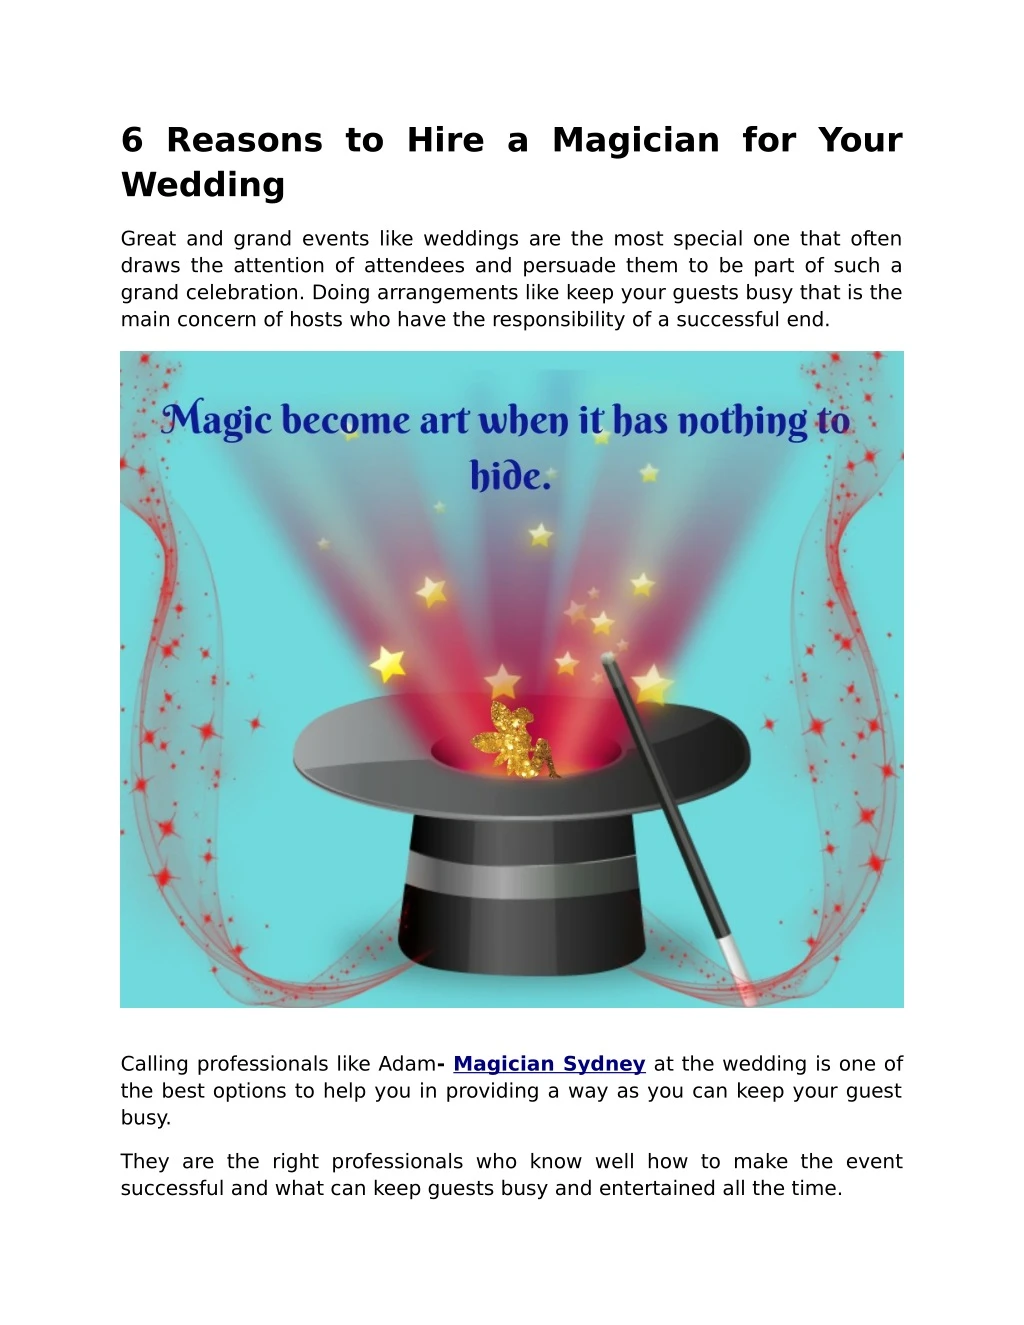 6 reasons to hire a magician for your wedding